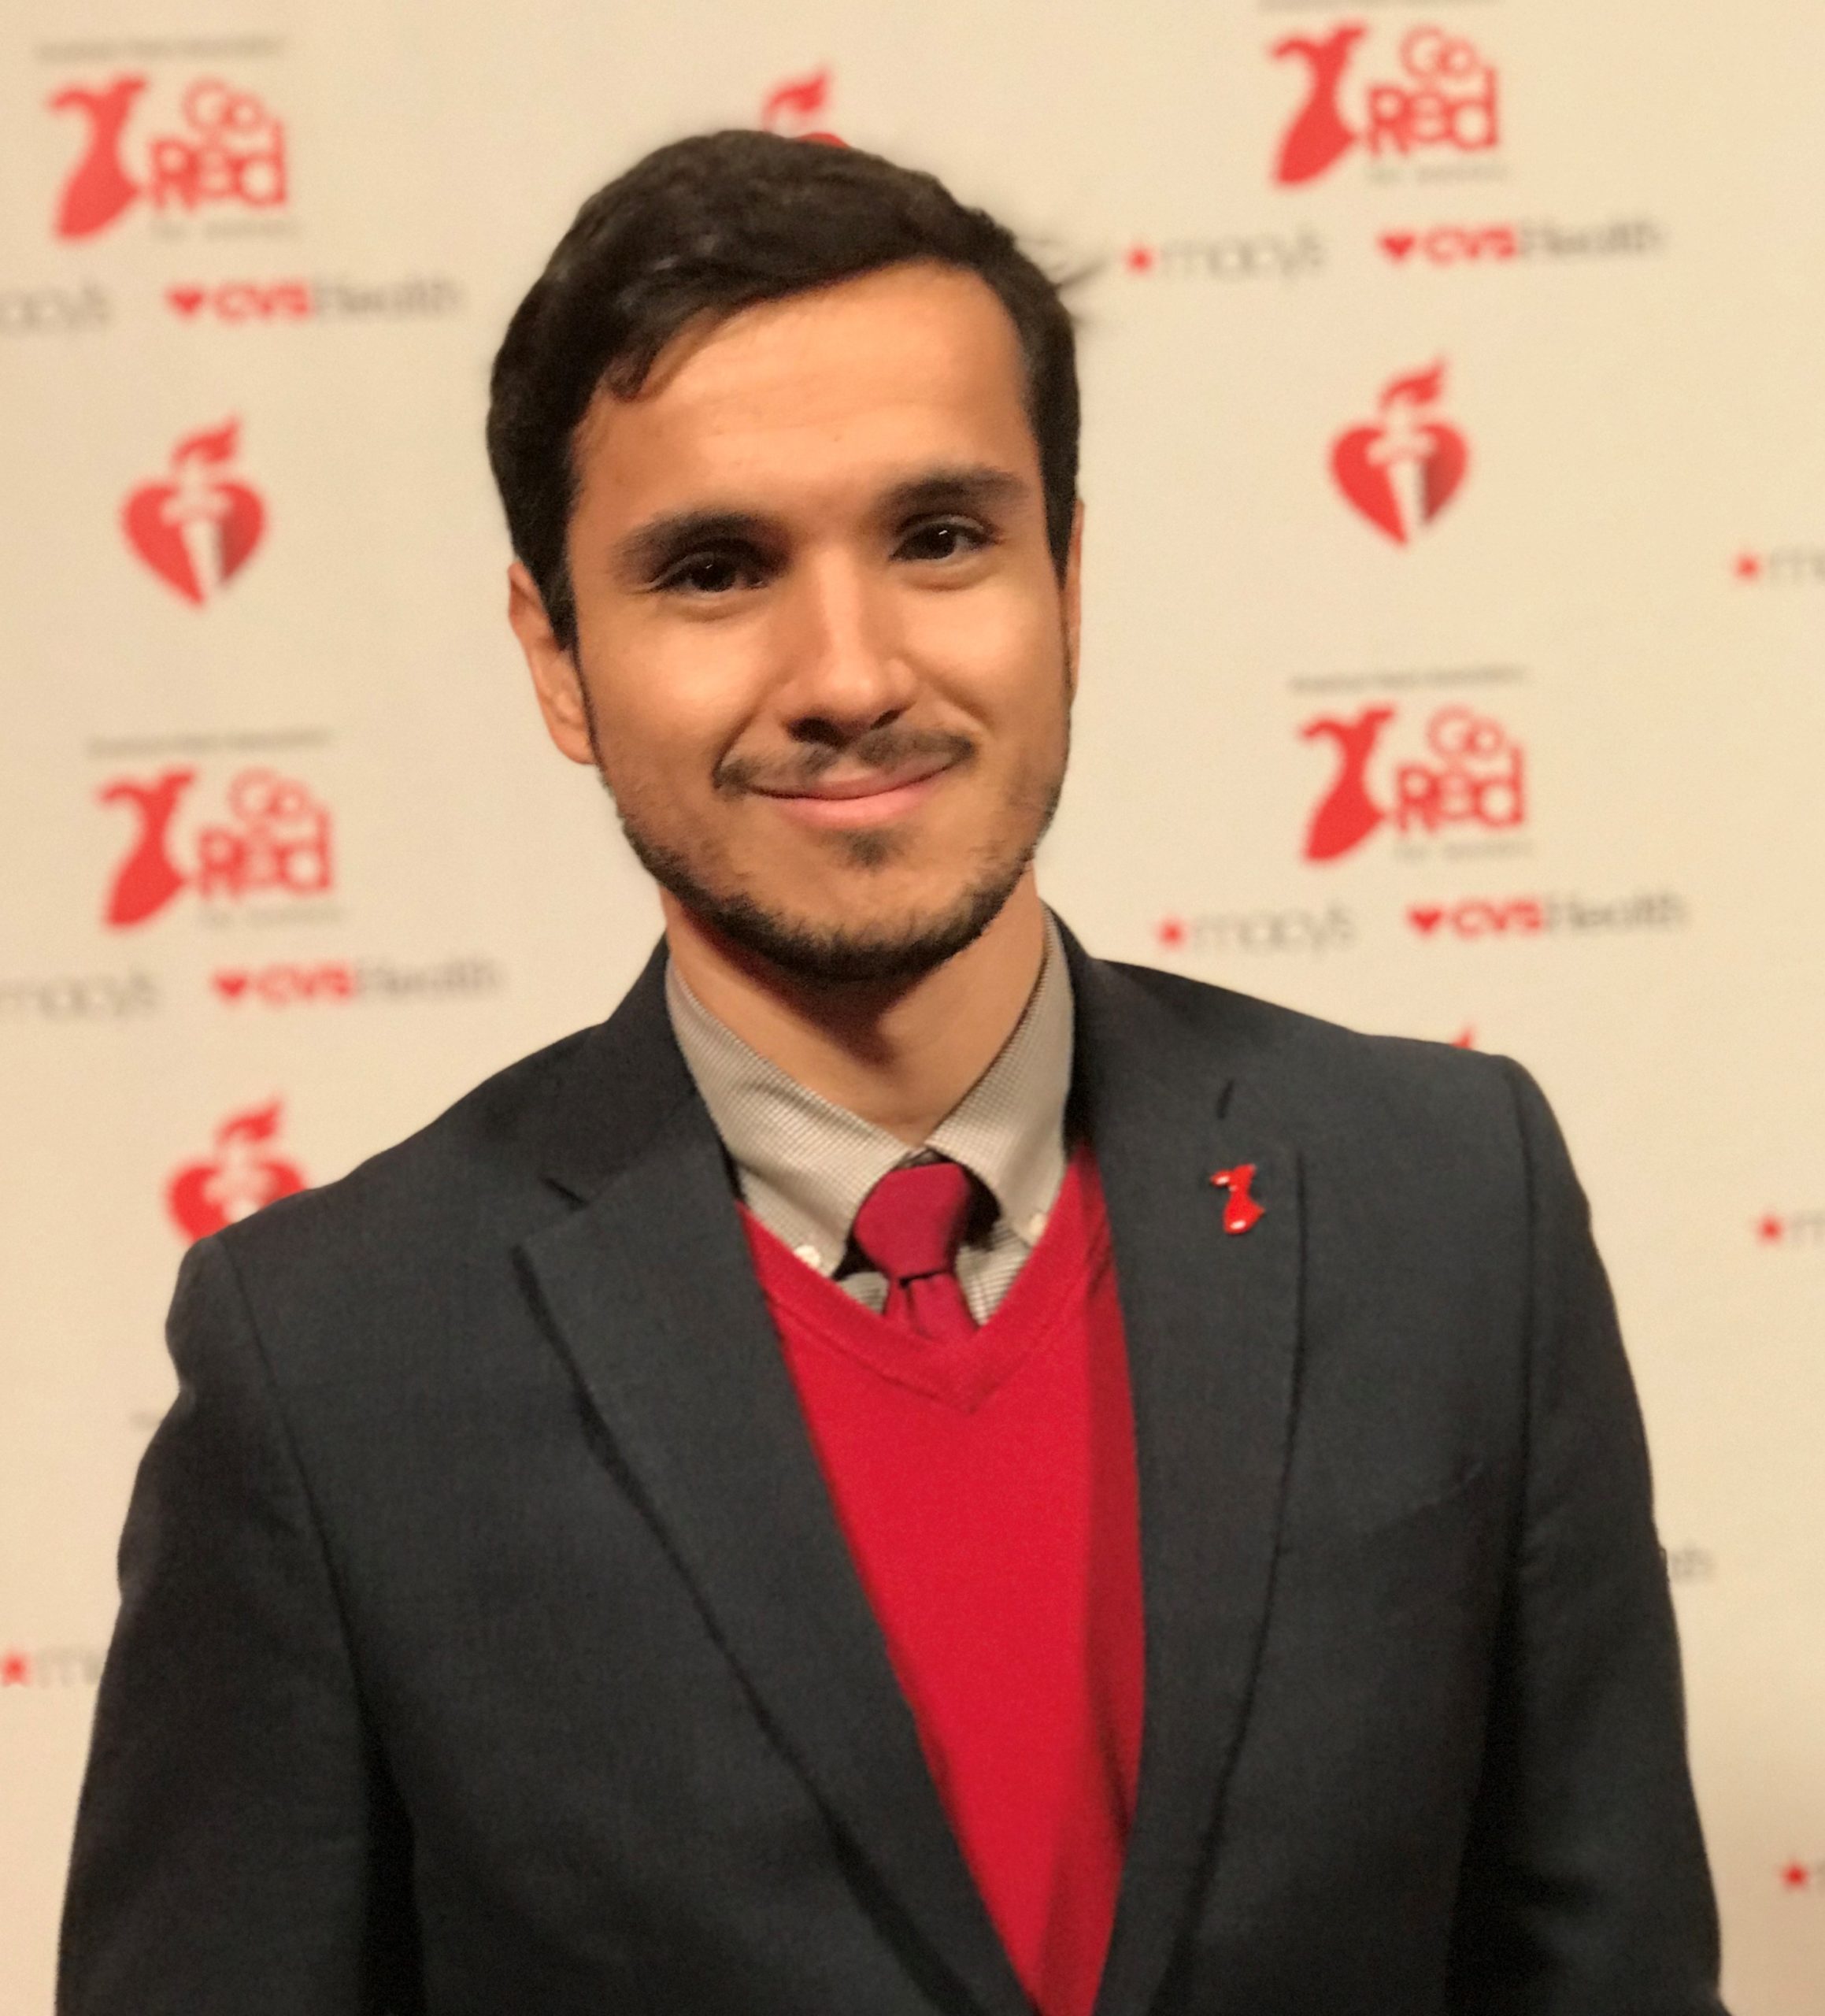 NYC Researcher Named the American Heart Association’s 2021 Distinguished Scientist in Arteriosclerosis, Thrombosis and Vascular Biology